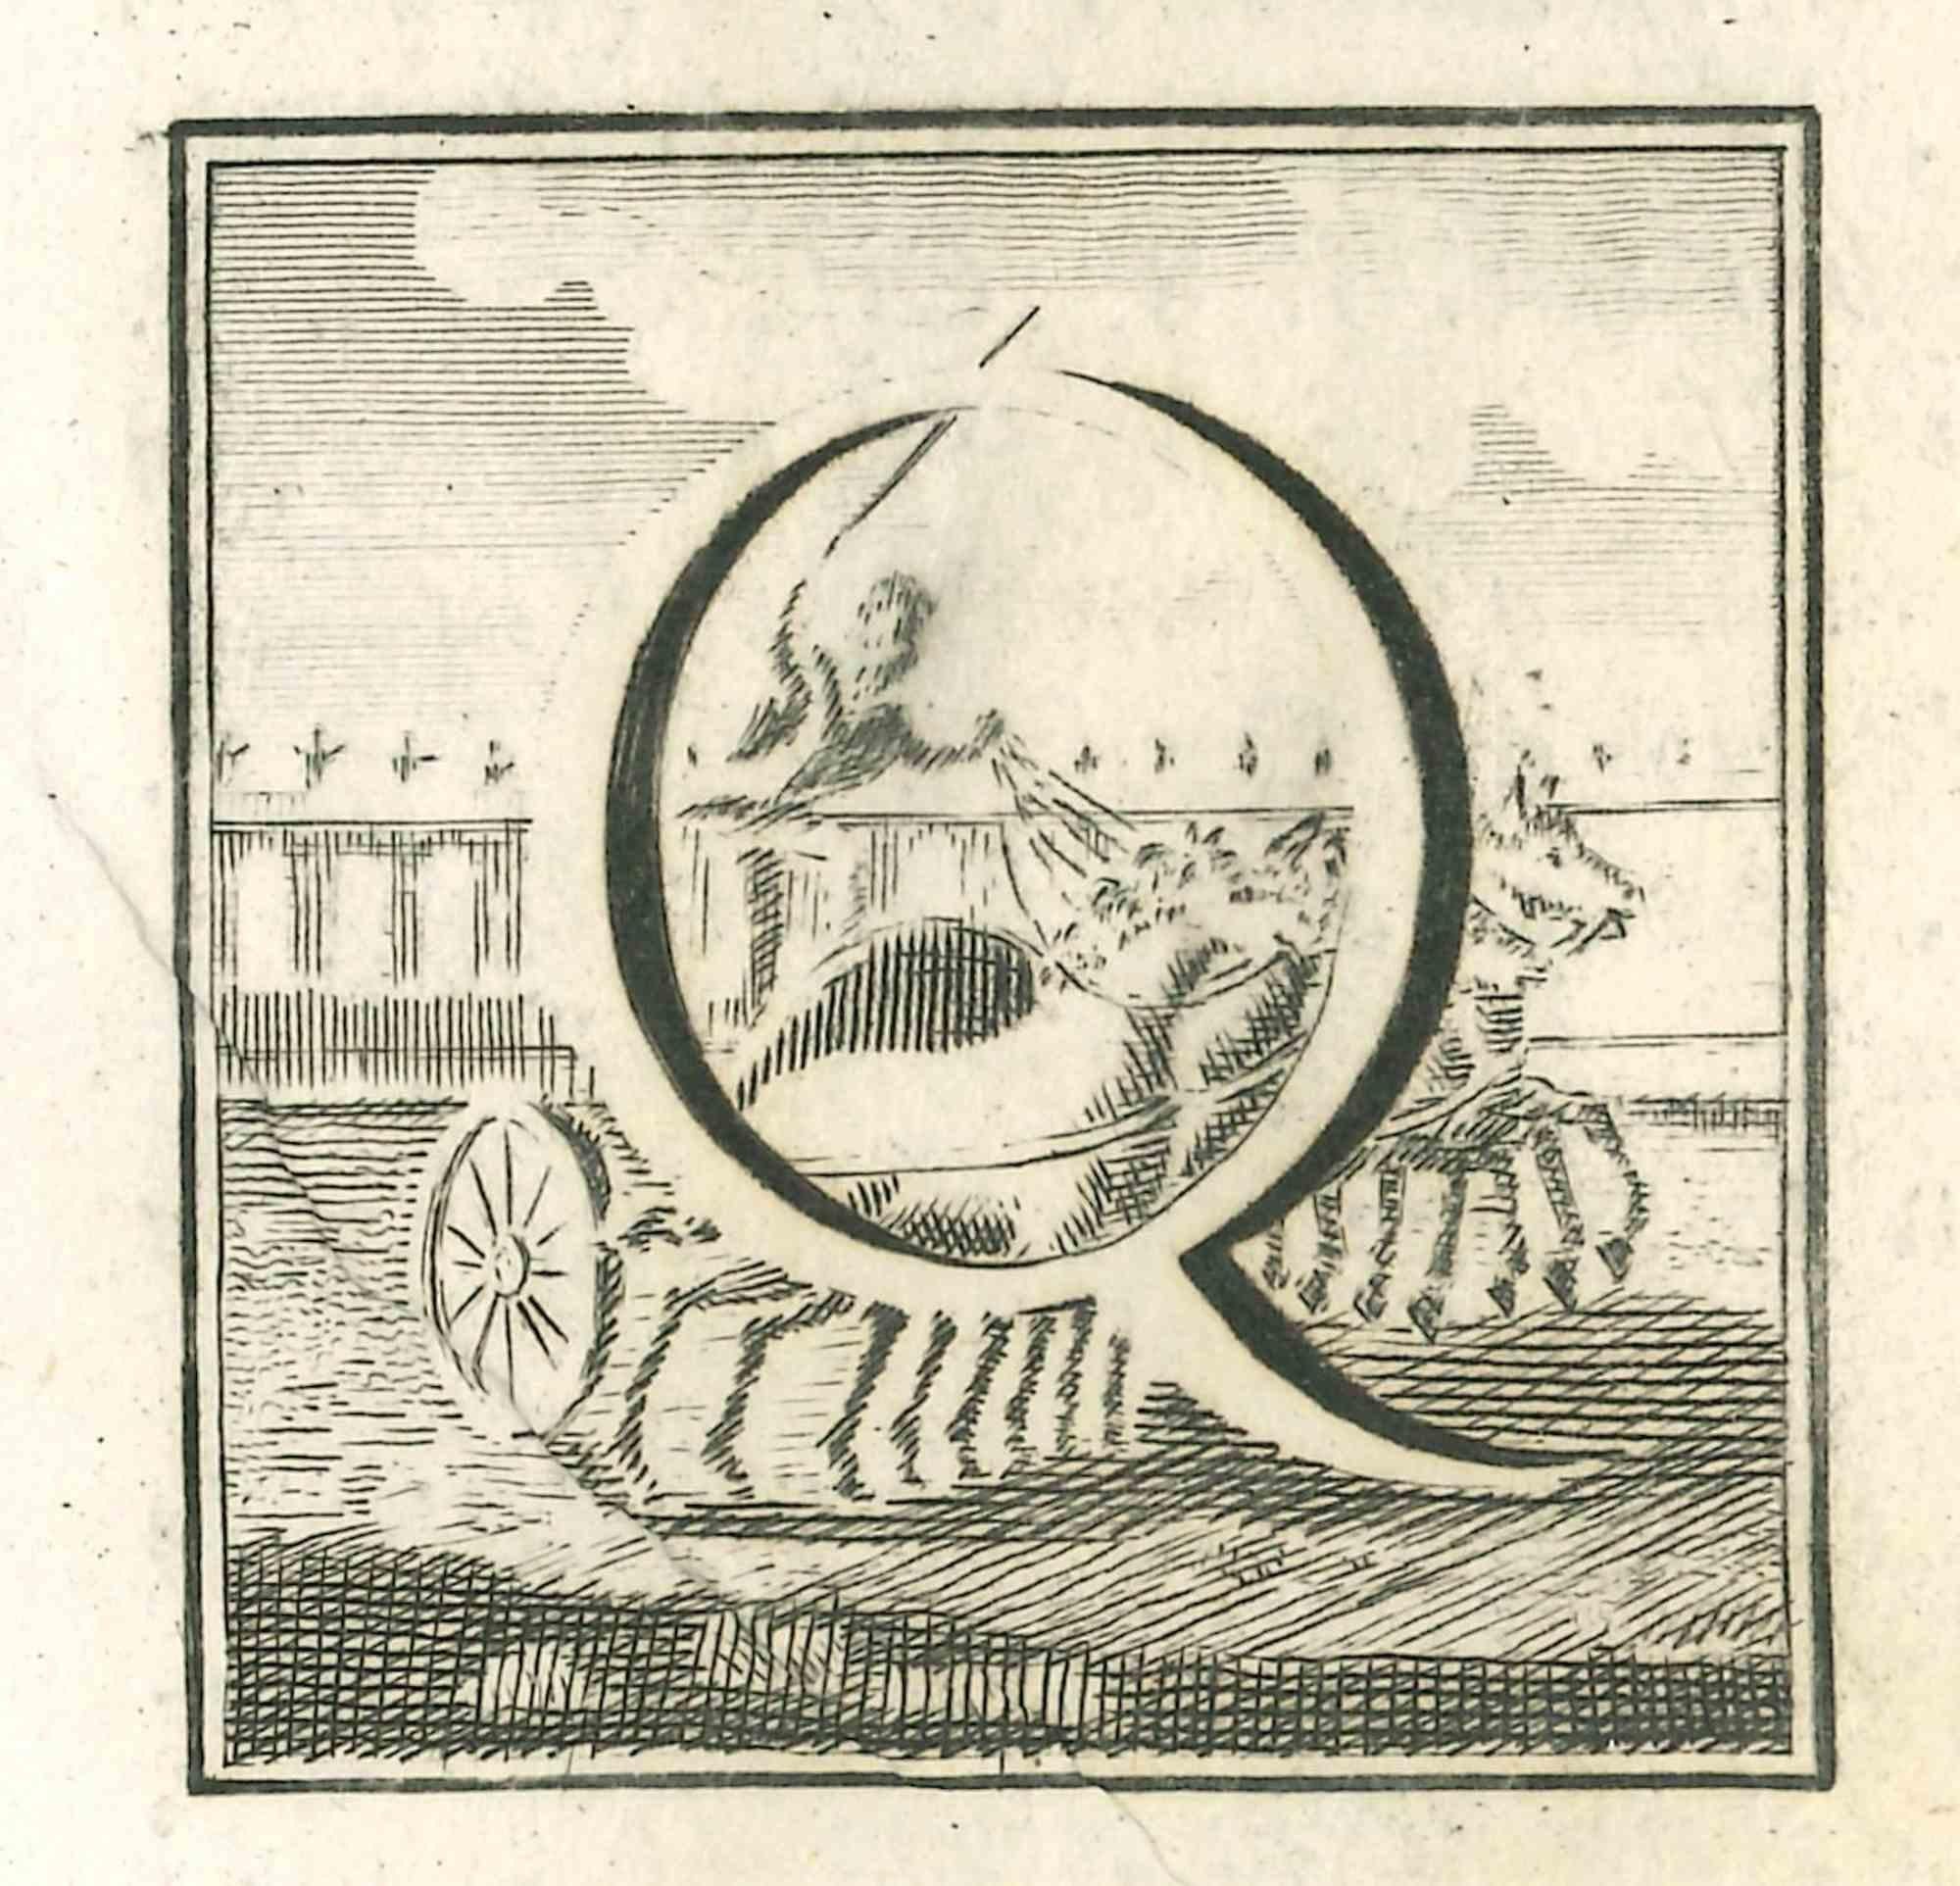 Letter Q is an Etching realized by Luigi Vanvitelli.

The etching belongs to the print suite “Antiquities of Herculaneum Exposed” (original title: “Le Antichità di Ercolano Esposte”), an eight-volume volume of engravings of the finds from the